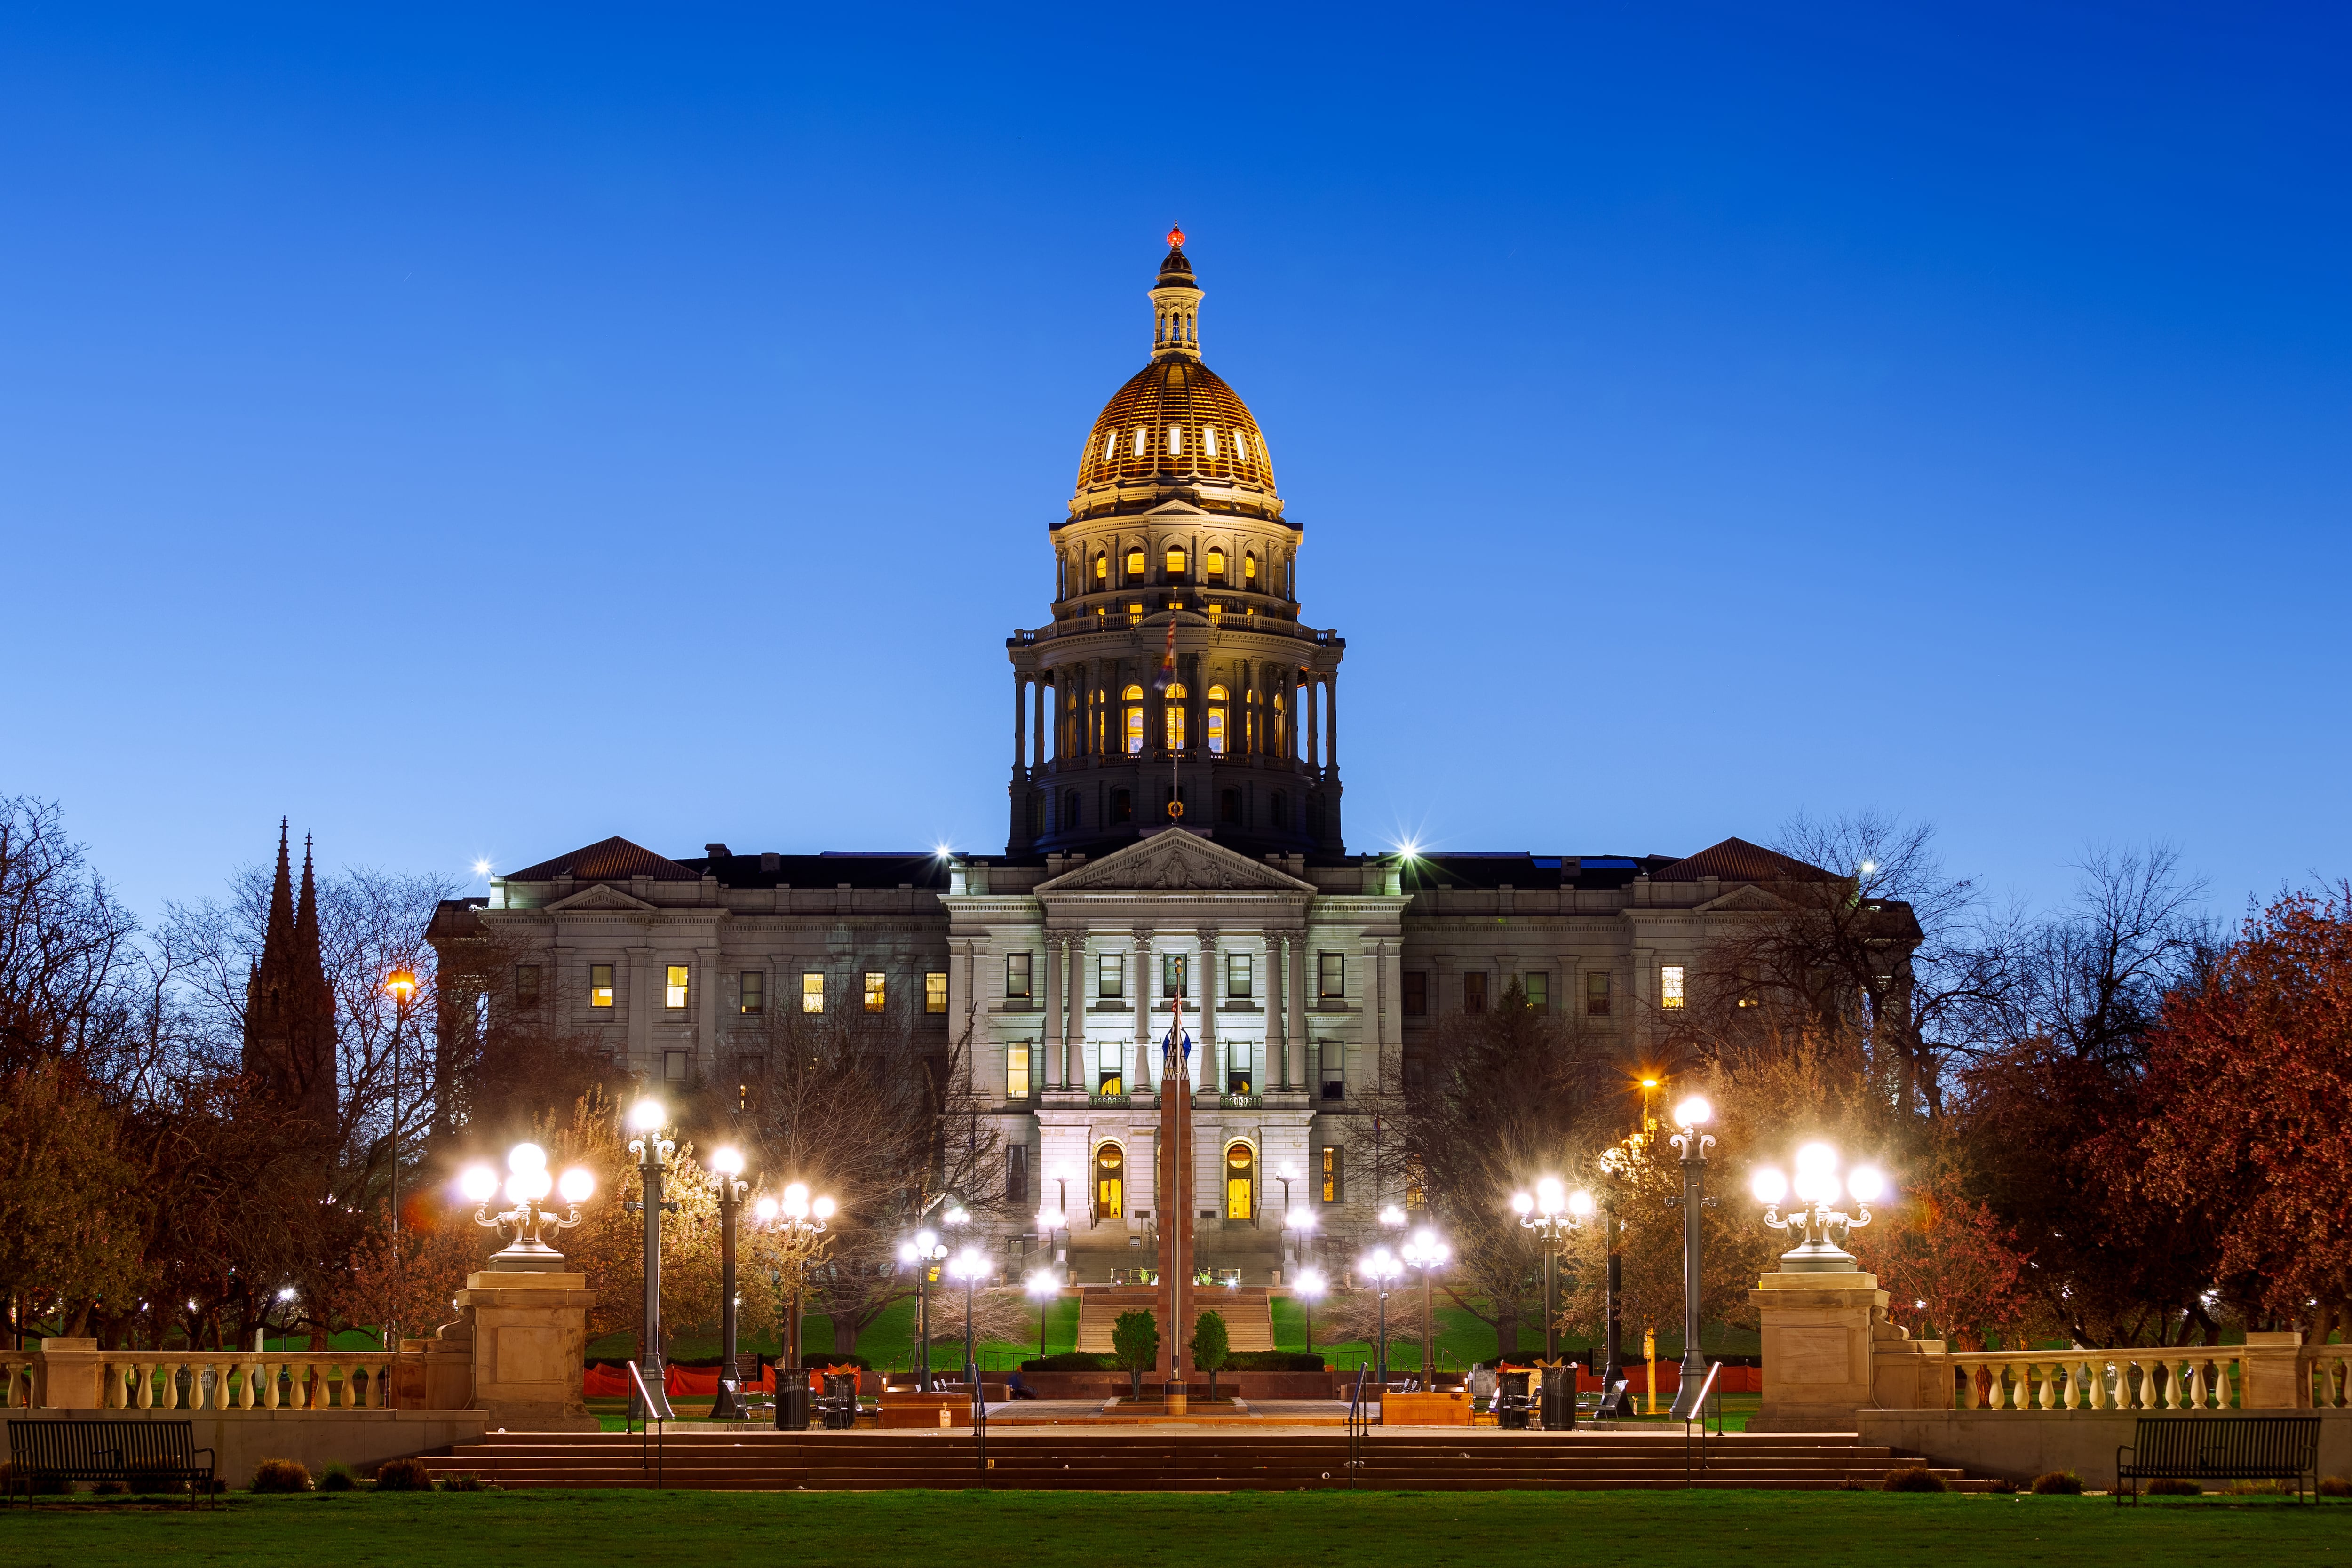 A view of the Colorado Capitol building from the front entrance with outdoor lights on and a dark blue sky in the background.